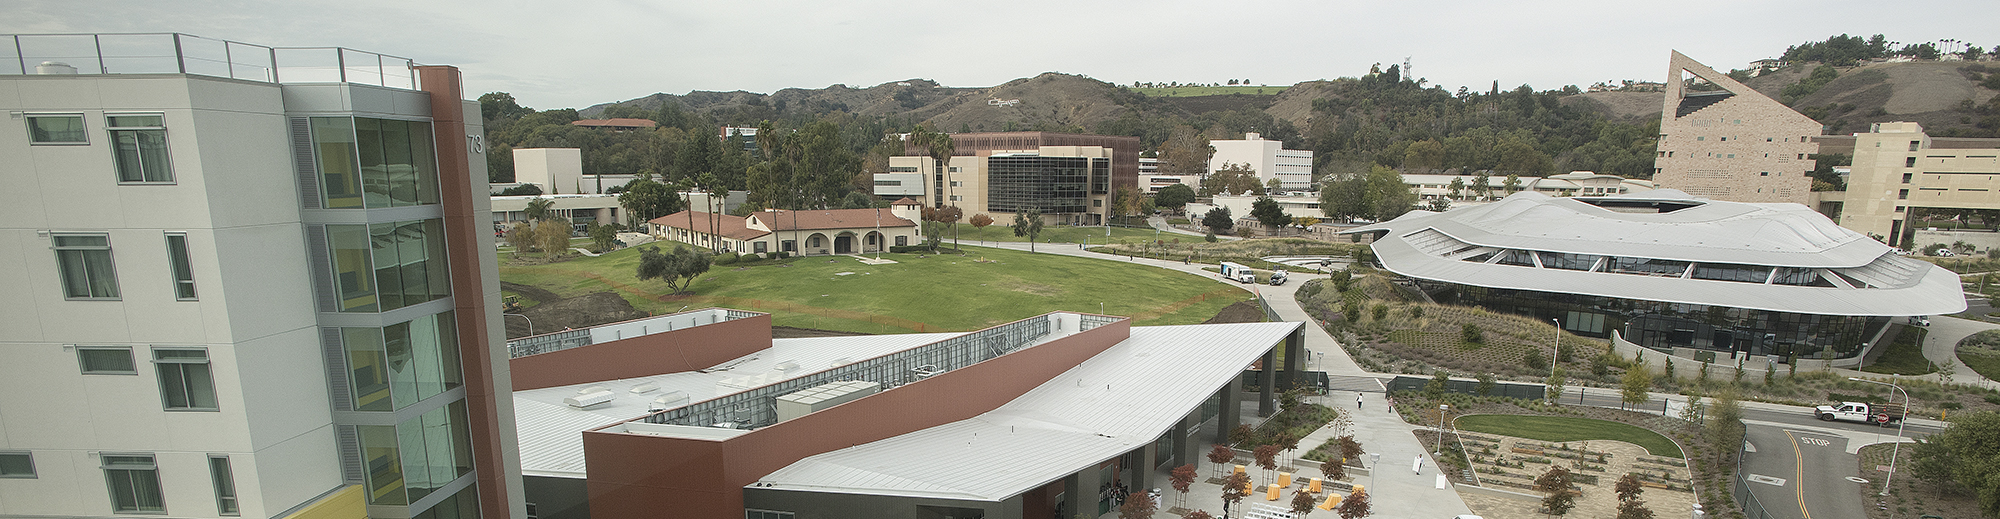 Aerial view of Cal Poly Pomona